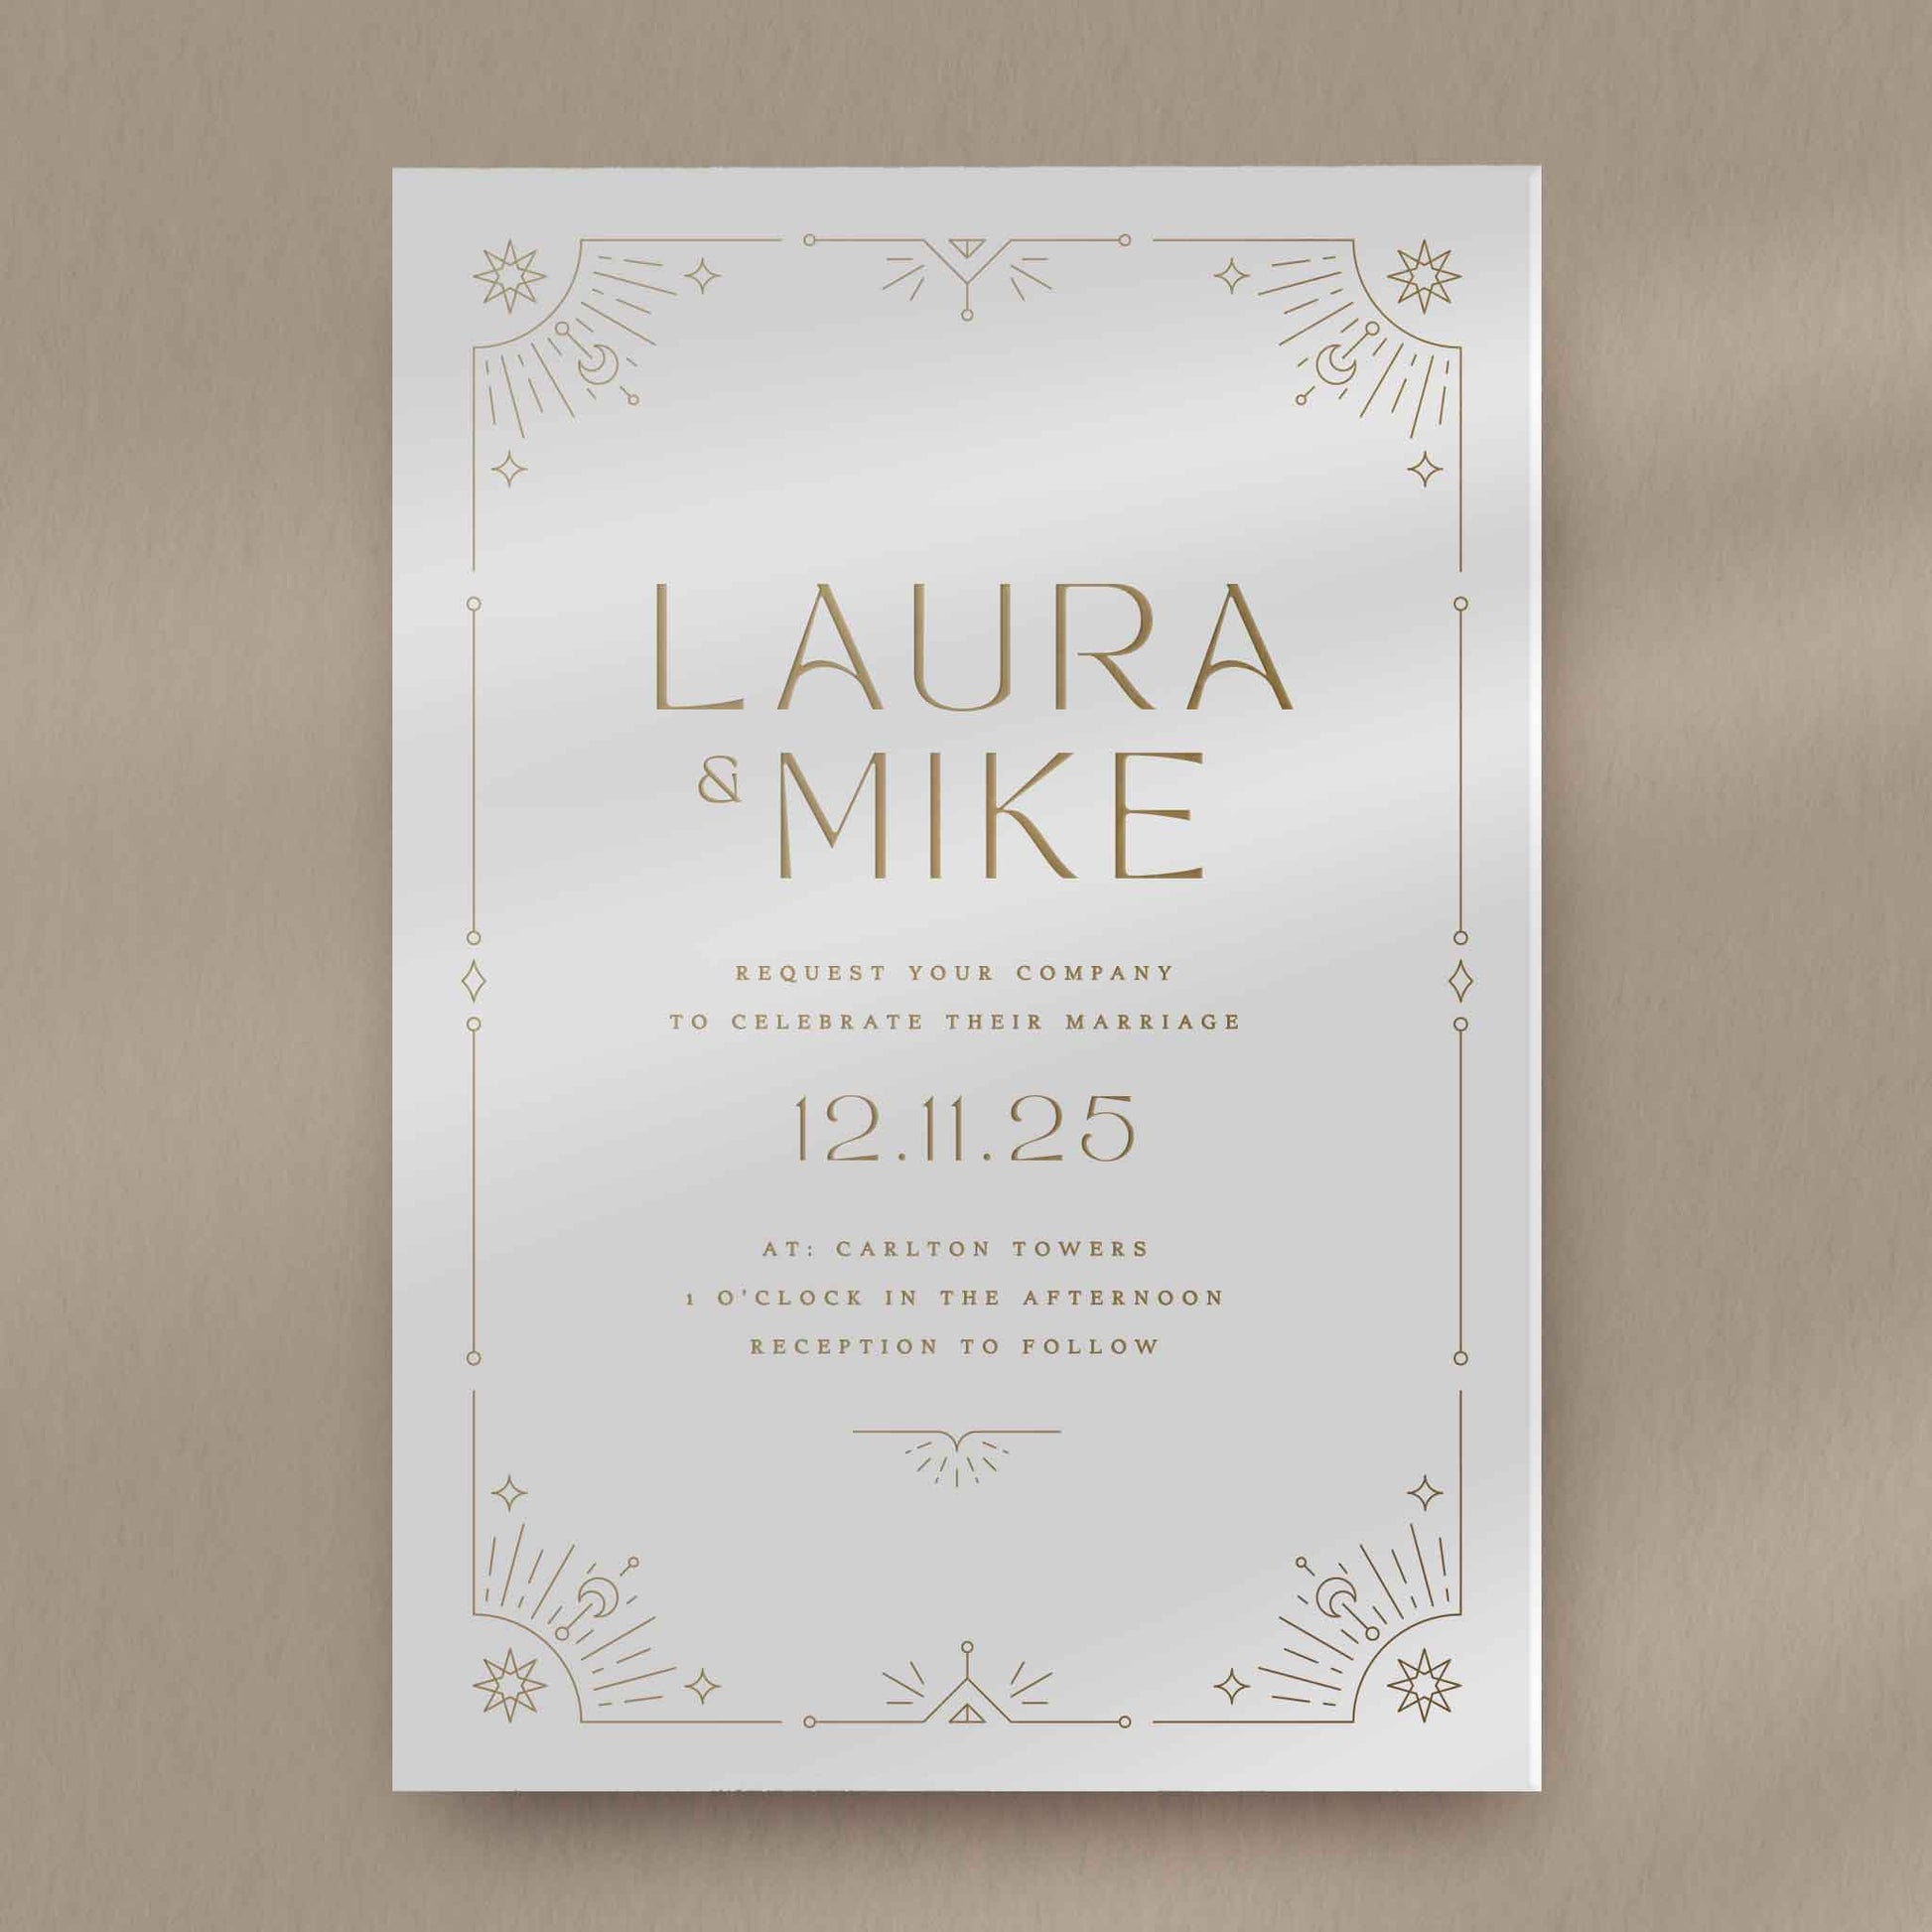 Day Invitation Sample  Ivy and Gold Wedding Stationery Laura  